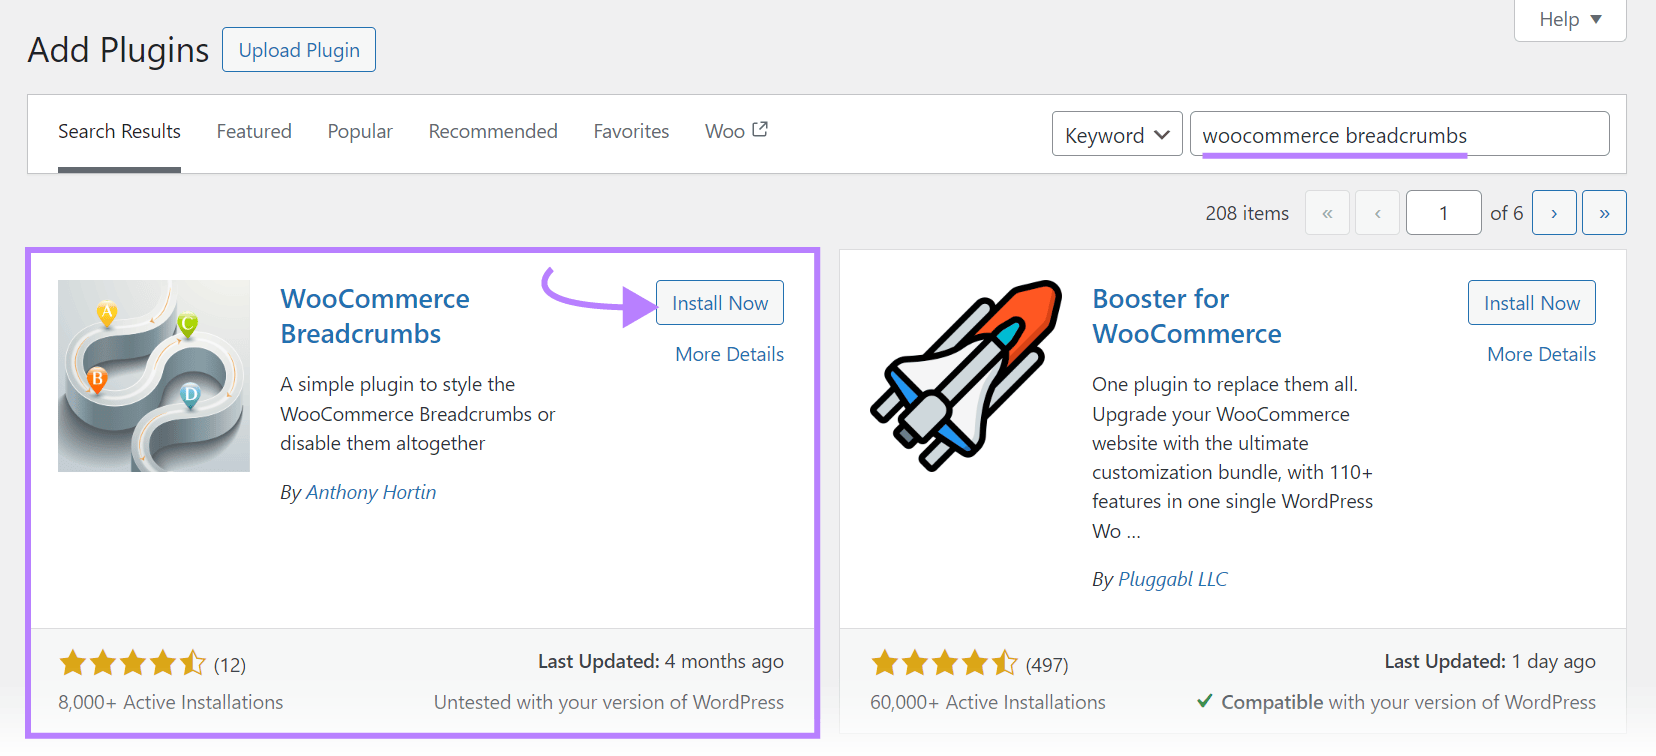 WooCommerce Breadcrumbs plugin within the "Add Plugins" page on WordPress